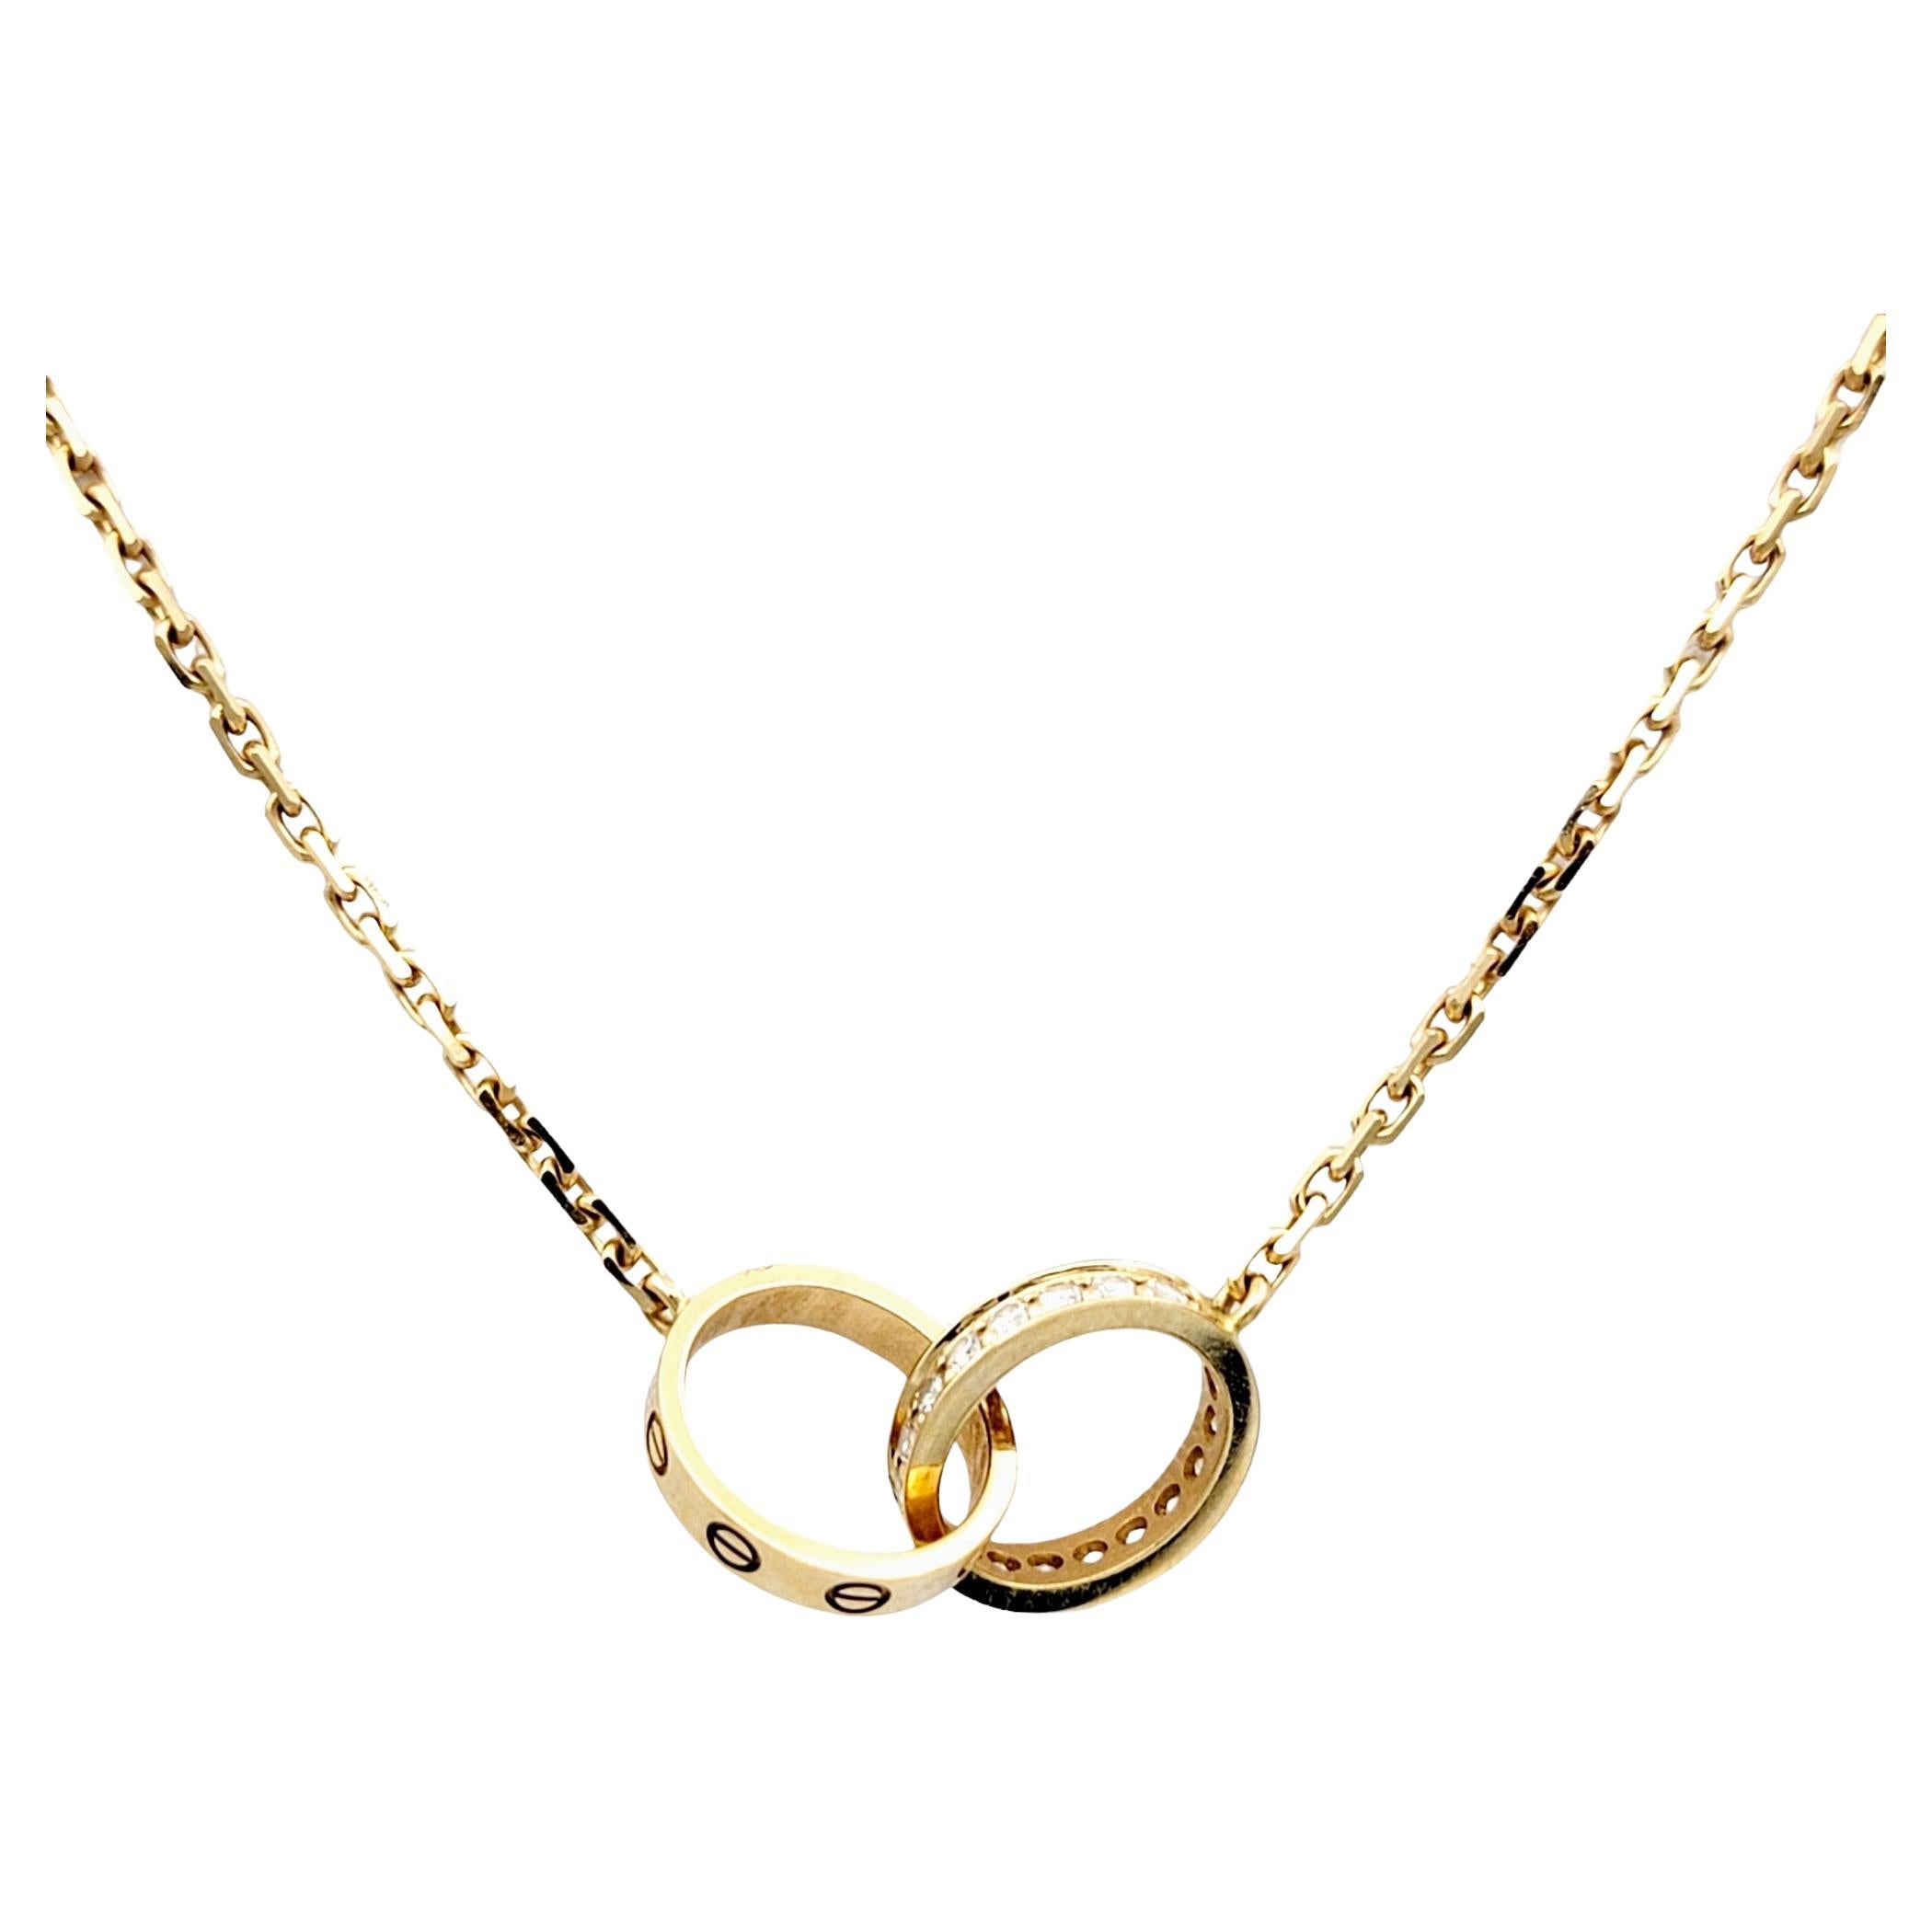 Cartier Interlocking Ring Love Necklace with Diamonds in 18 Karat Pink Gold, Box For Sale